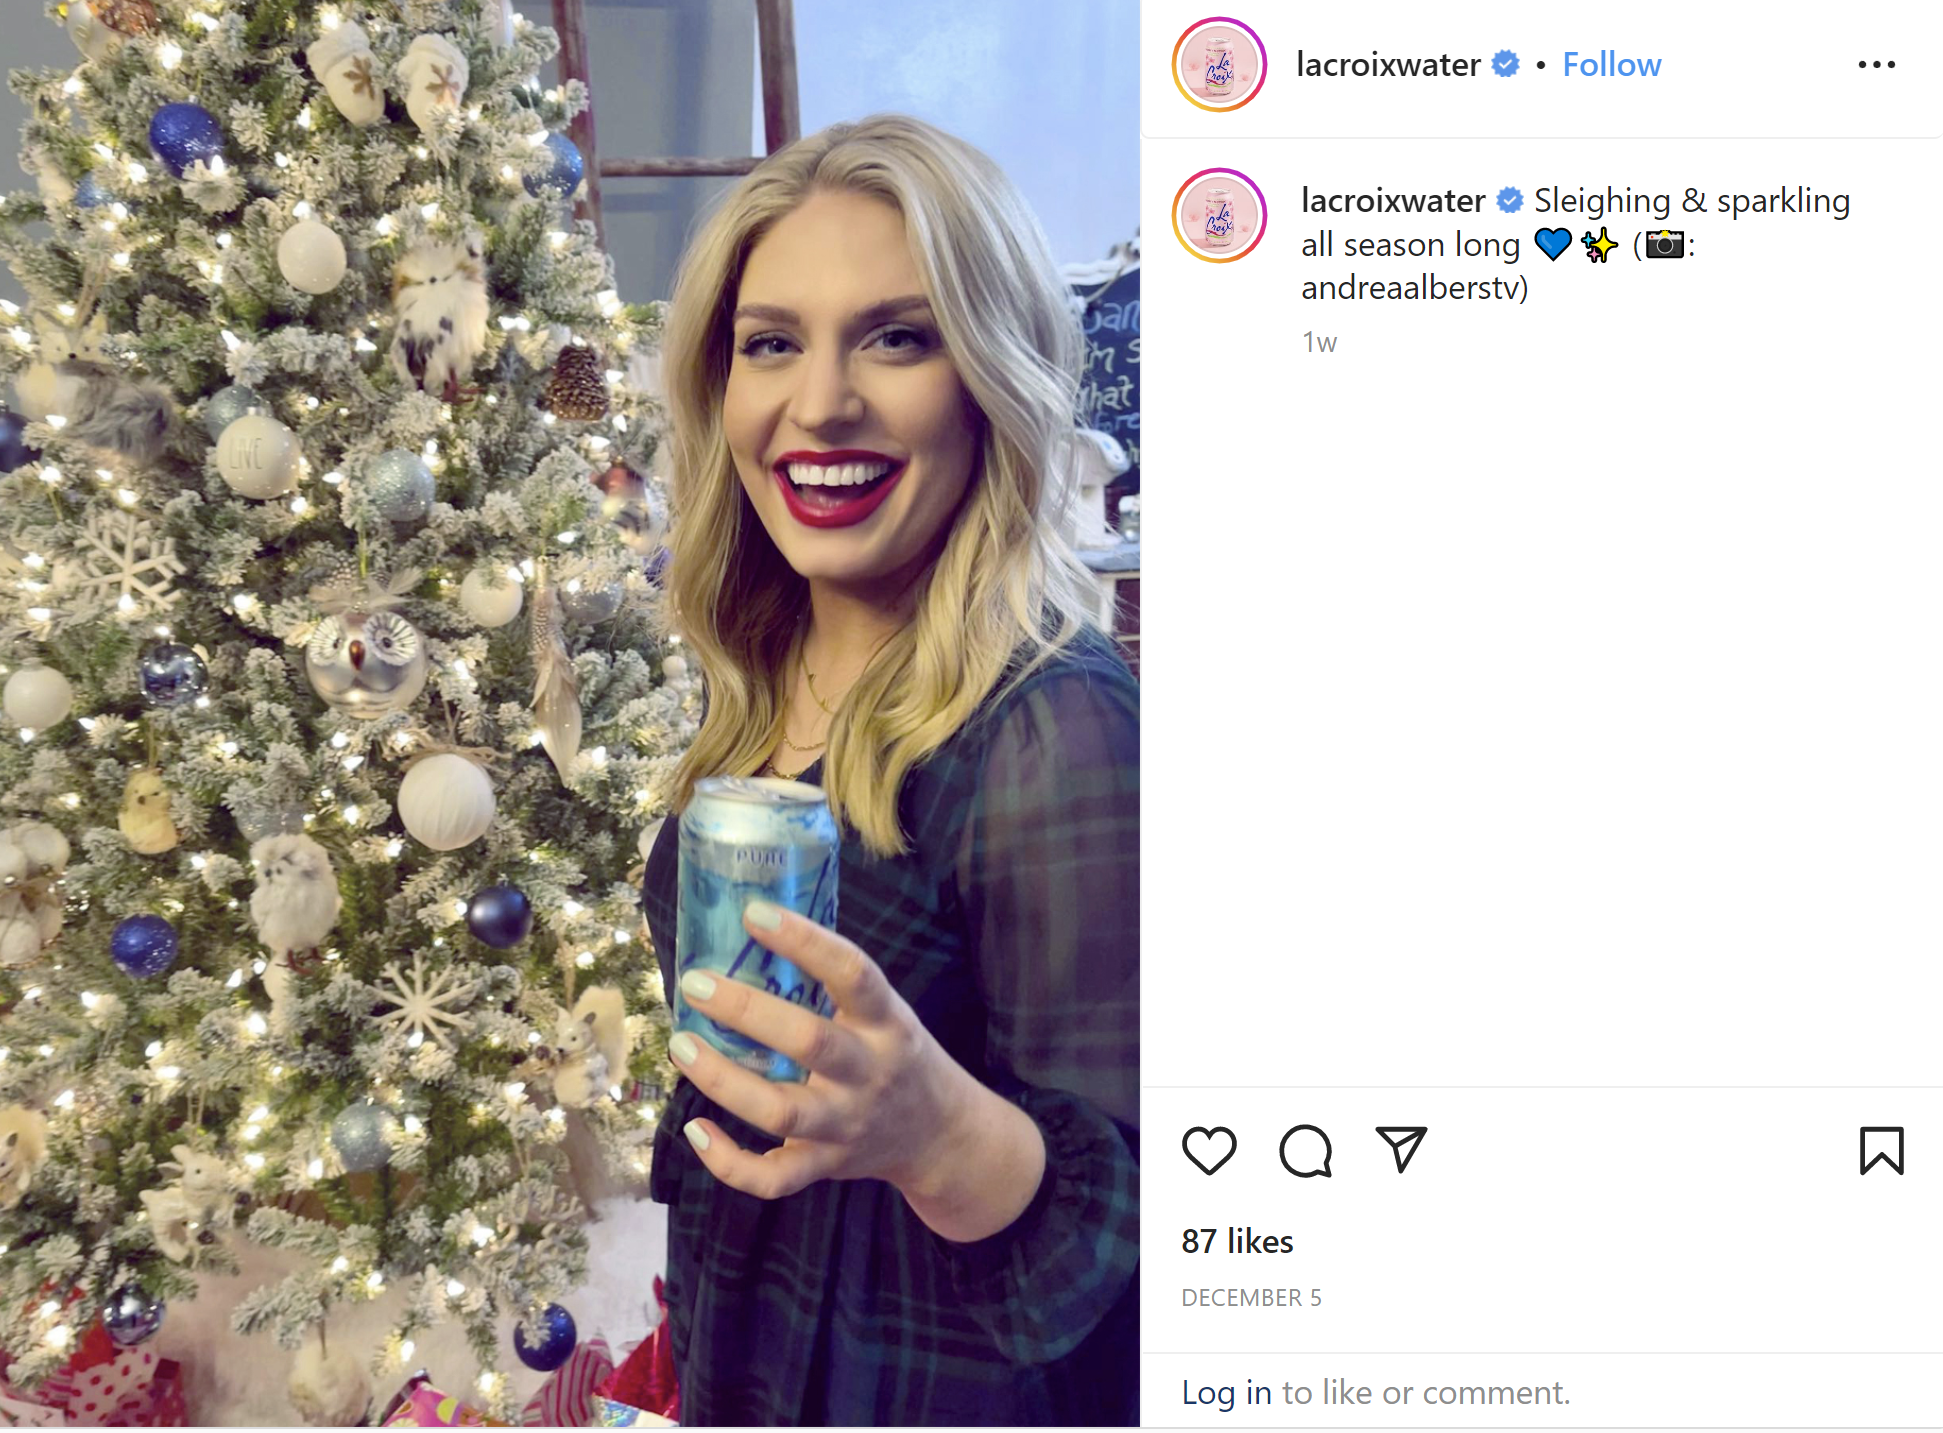 Micro-influencer Andrea Allers caught up with La Croix